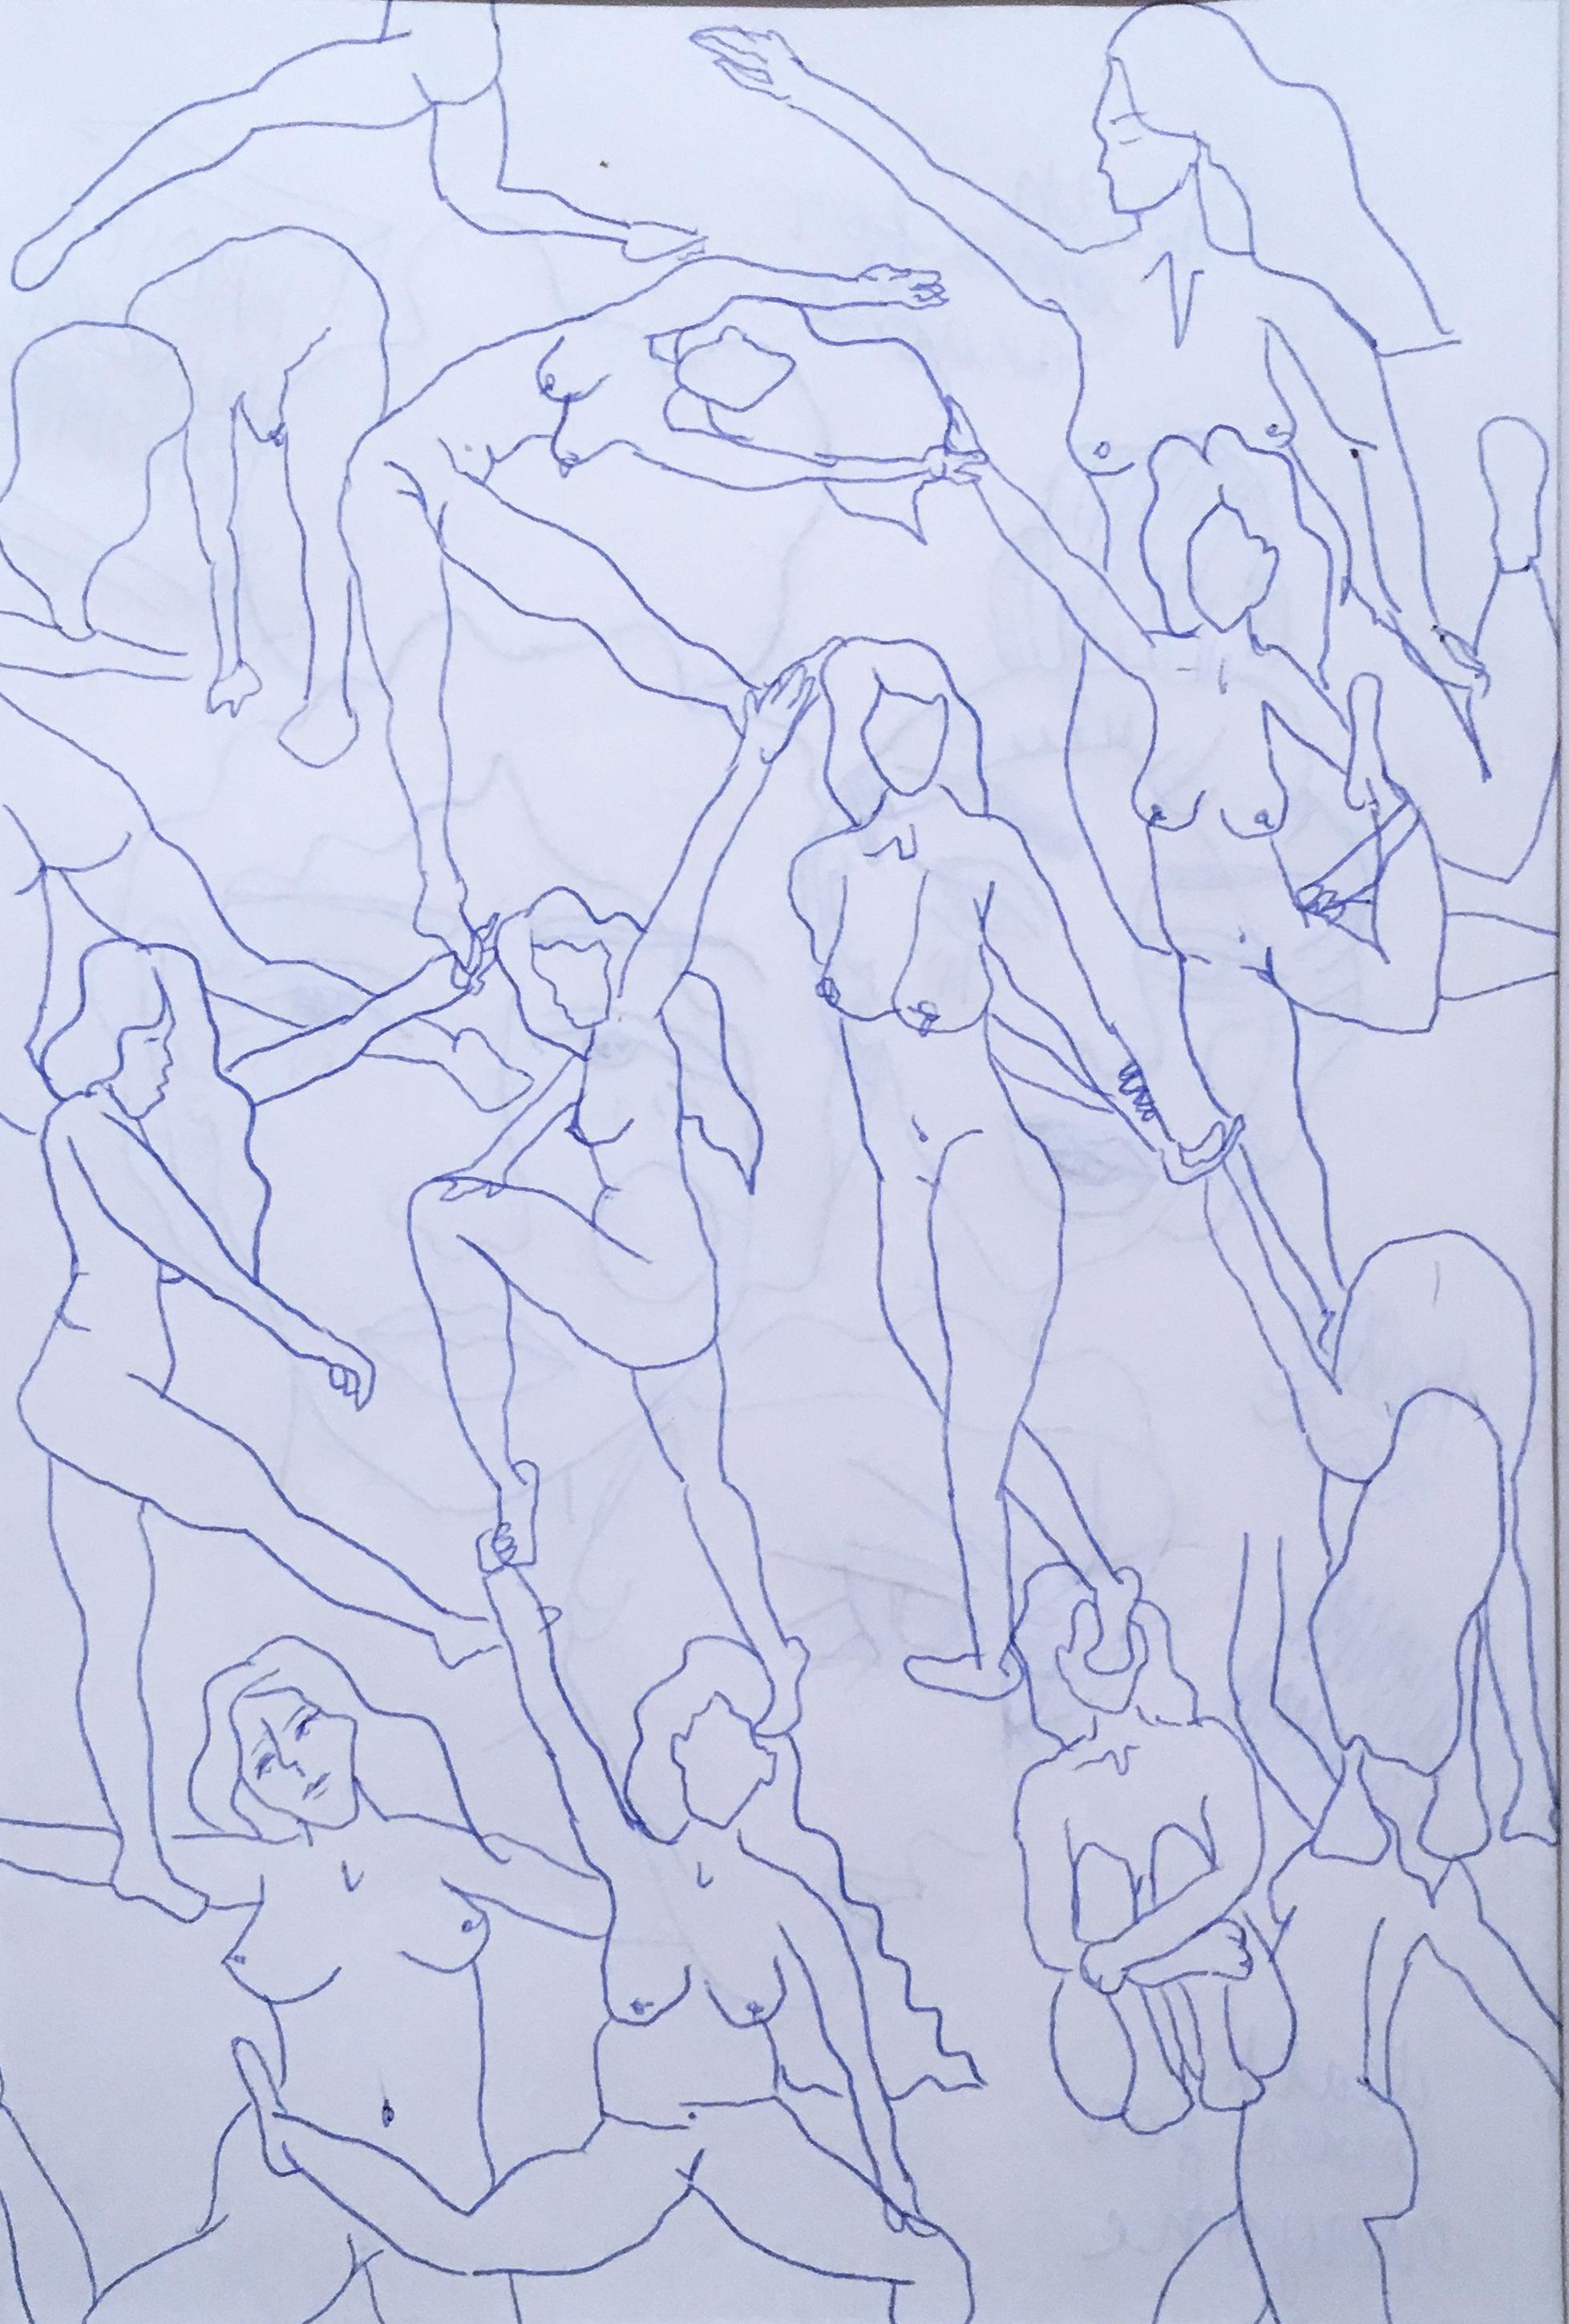 Blue Nudes I, Ink on Paper Blue & White Drawing, Figurative Study Women Posing For Sale 2